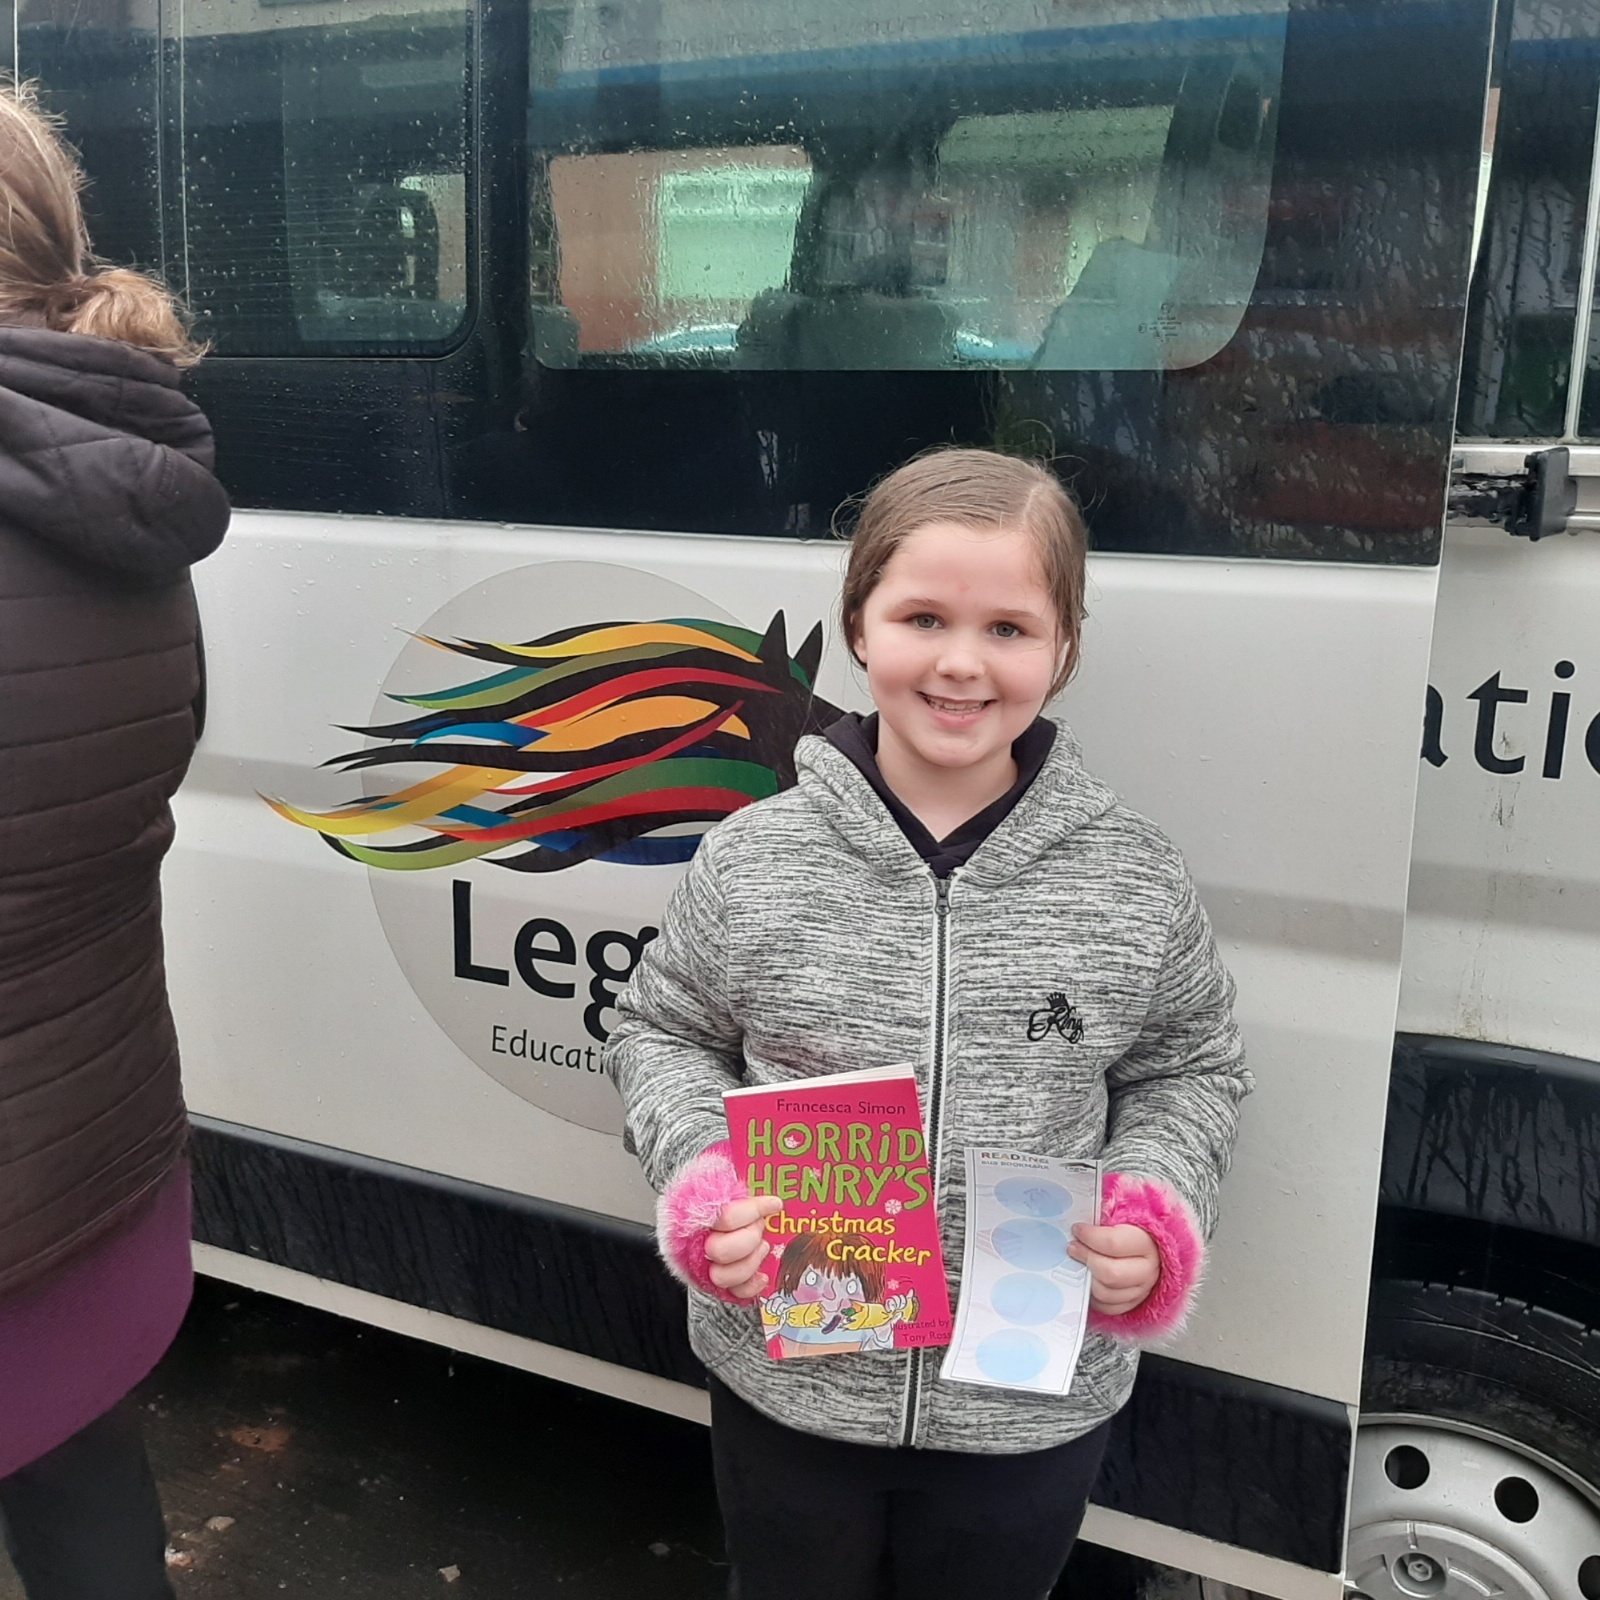 Spa Academy Askern - Leger Library Bus